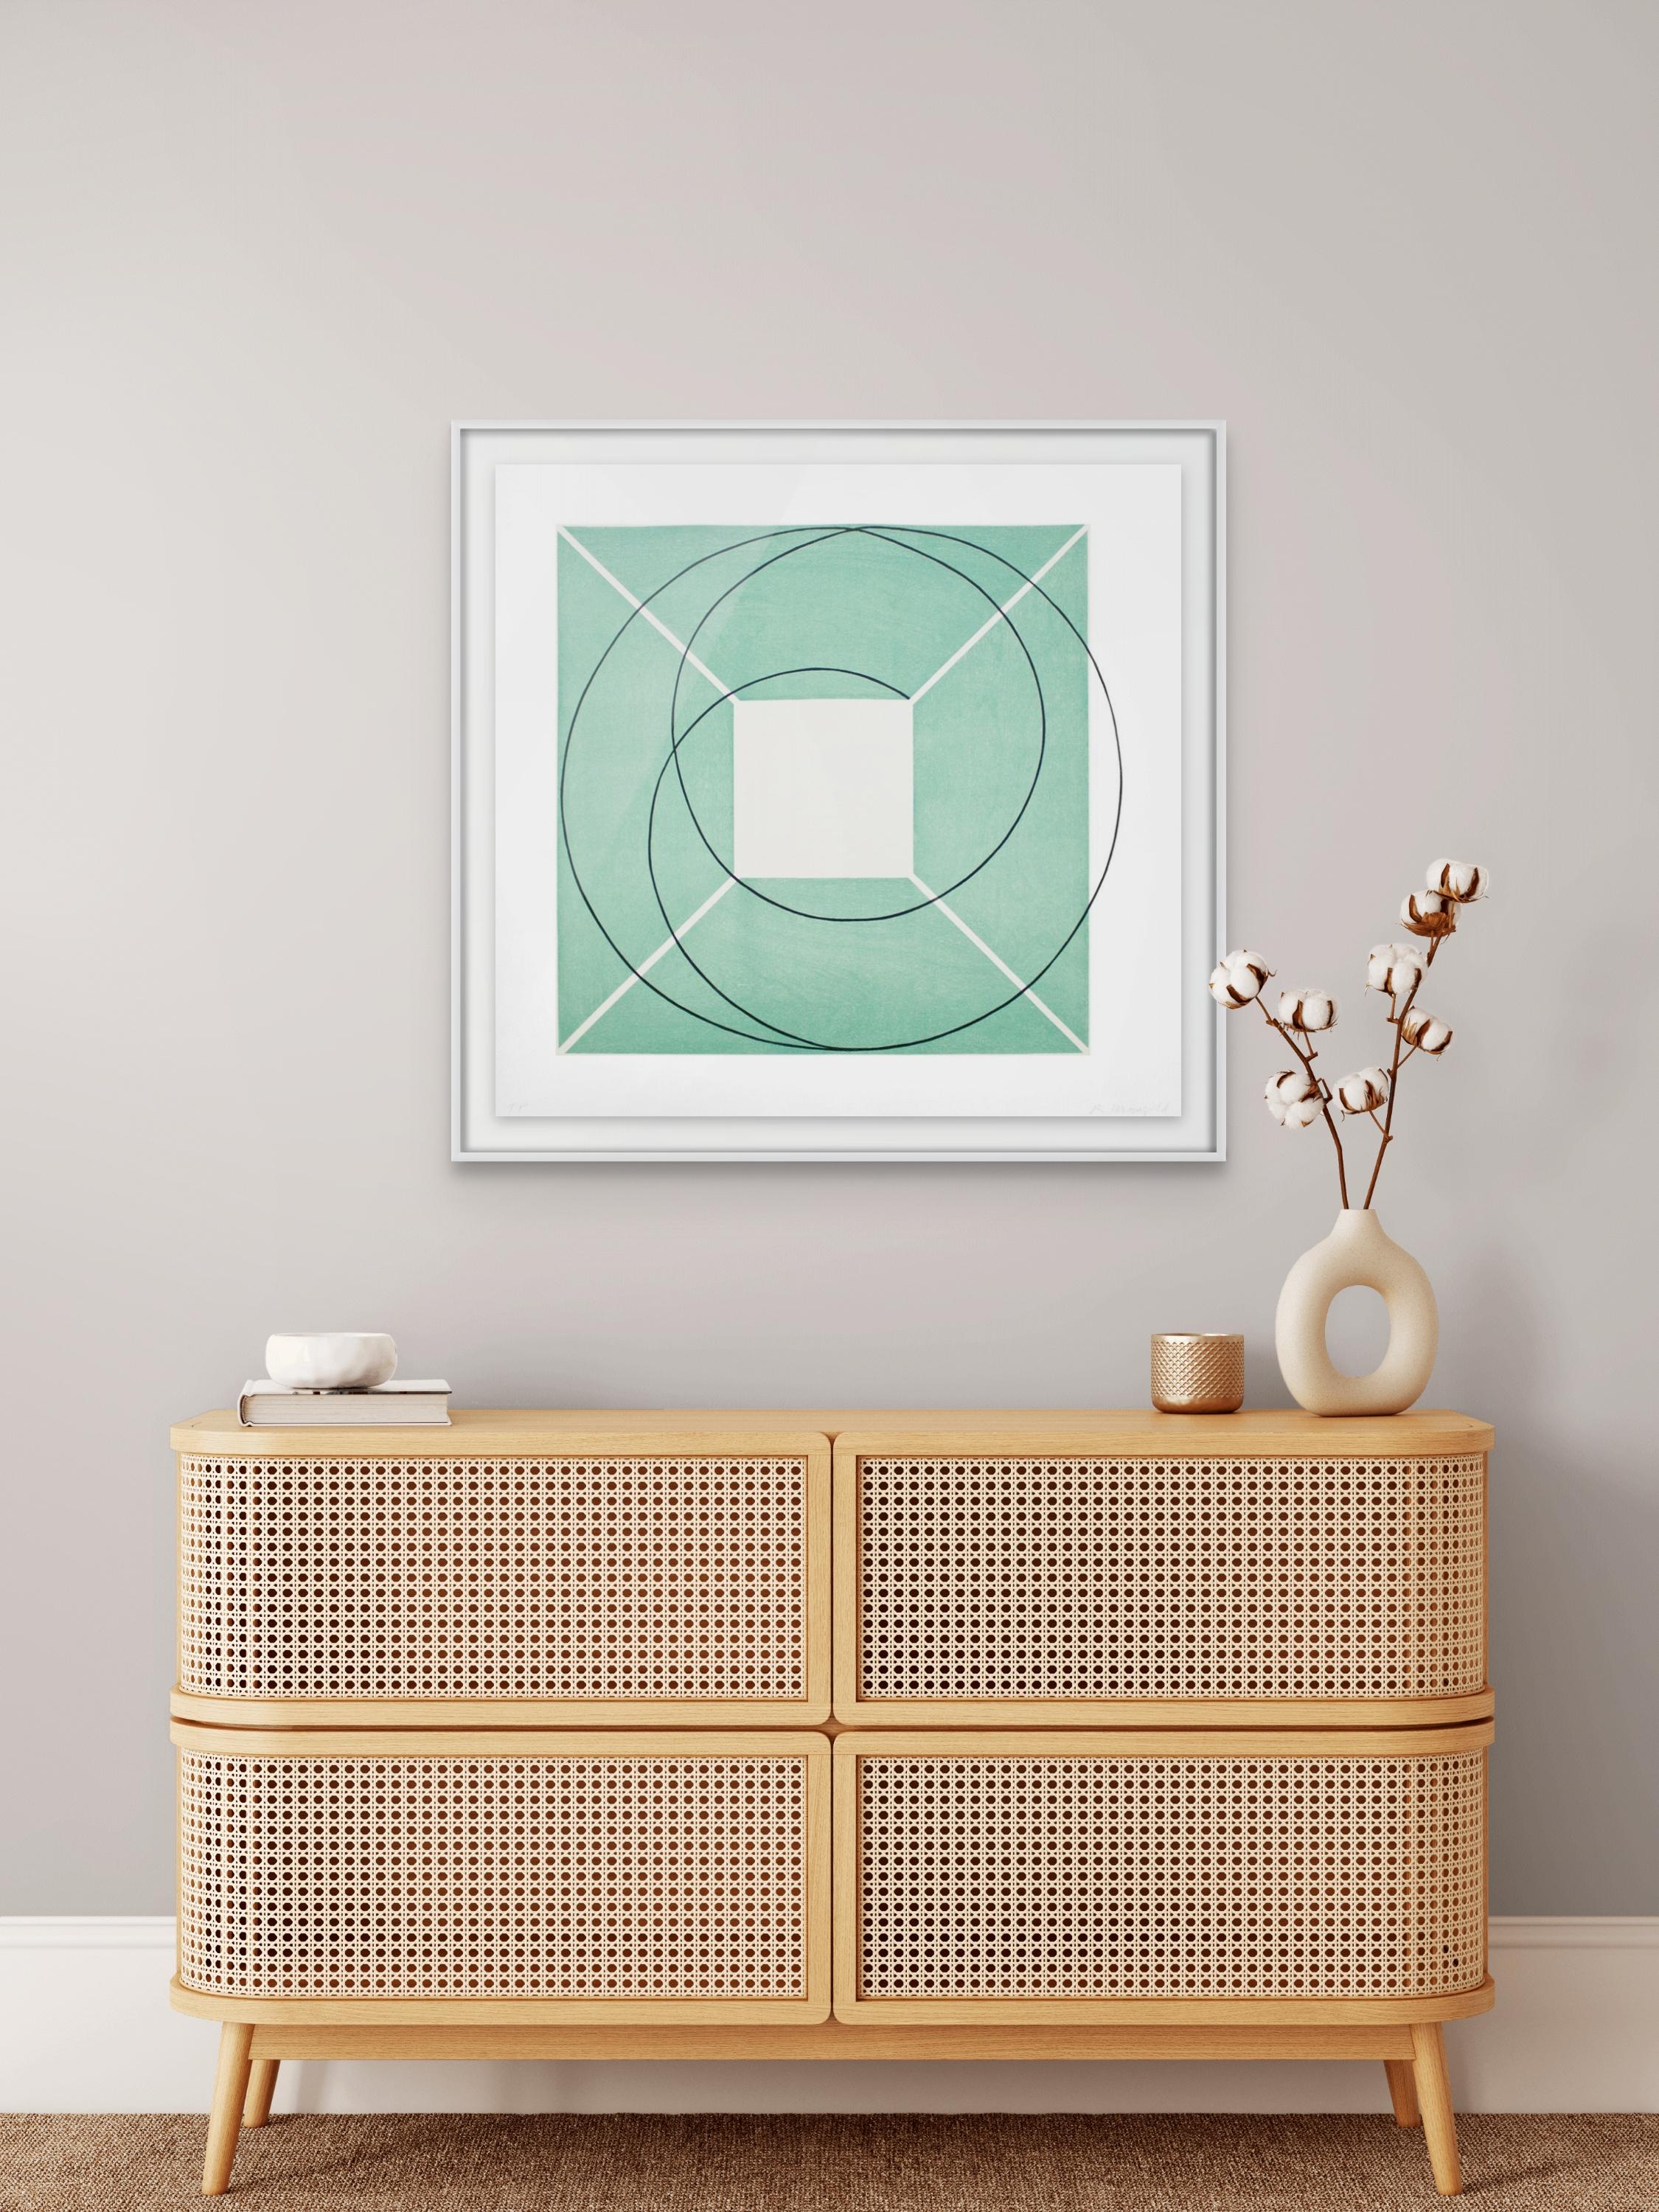 Frame with Separation - Print by Robert Mangold